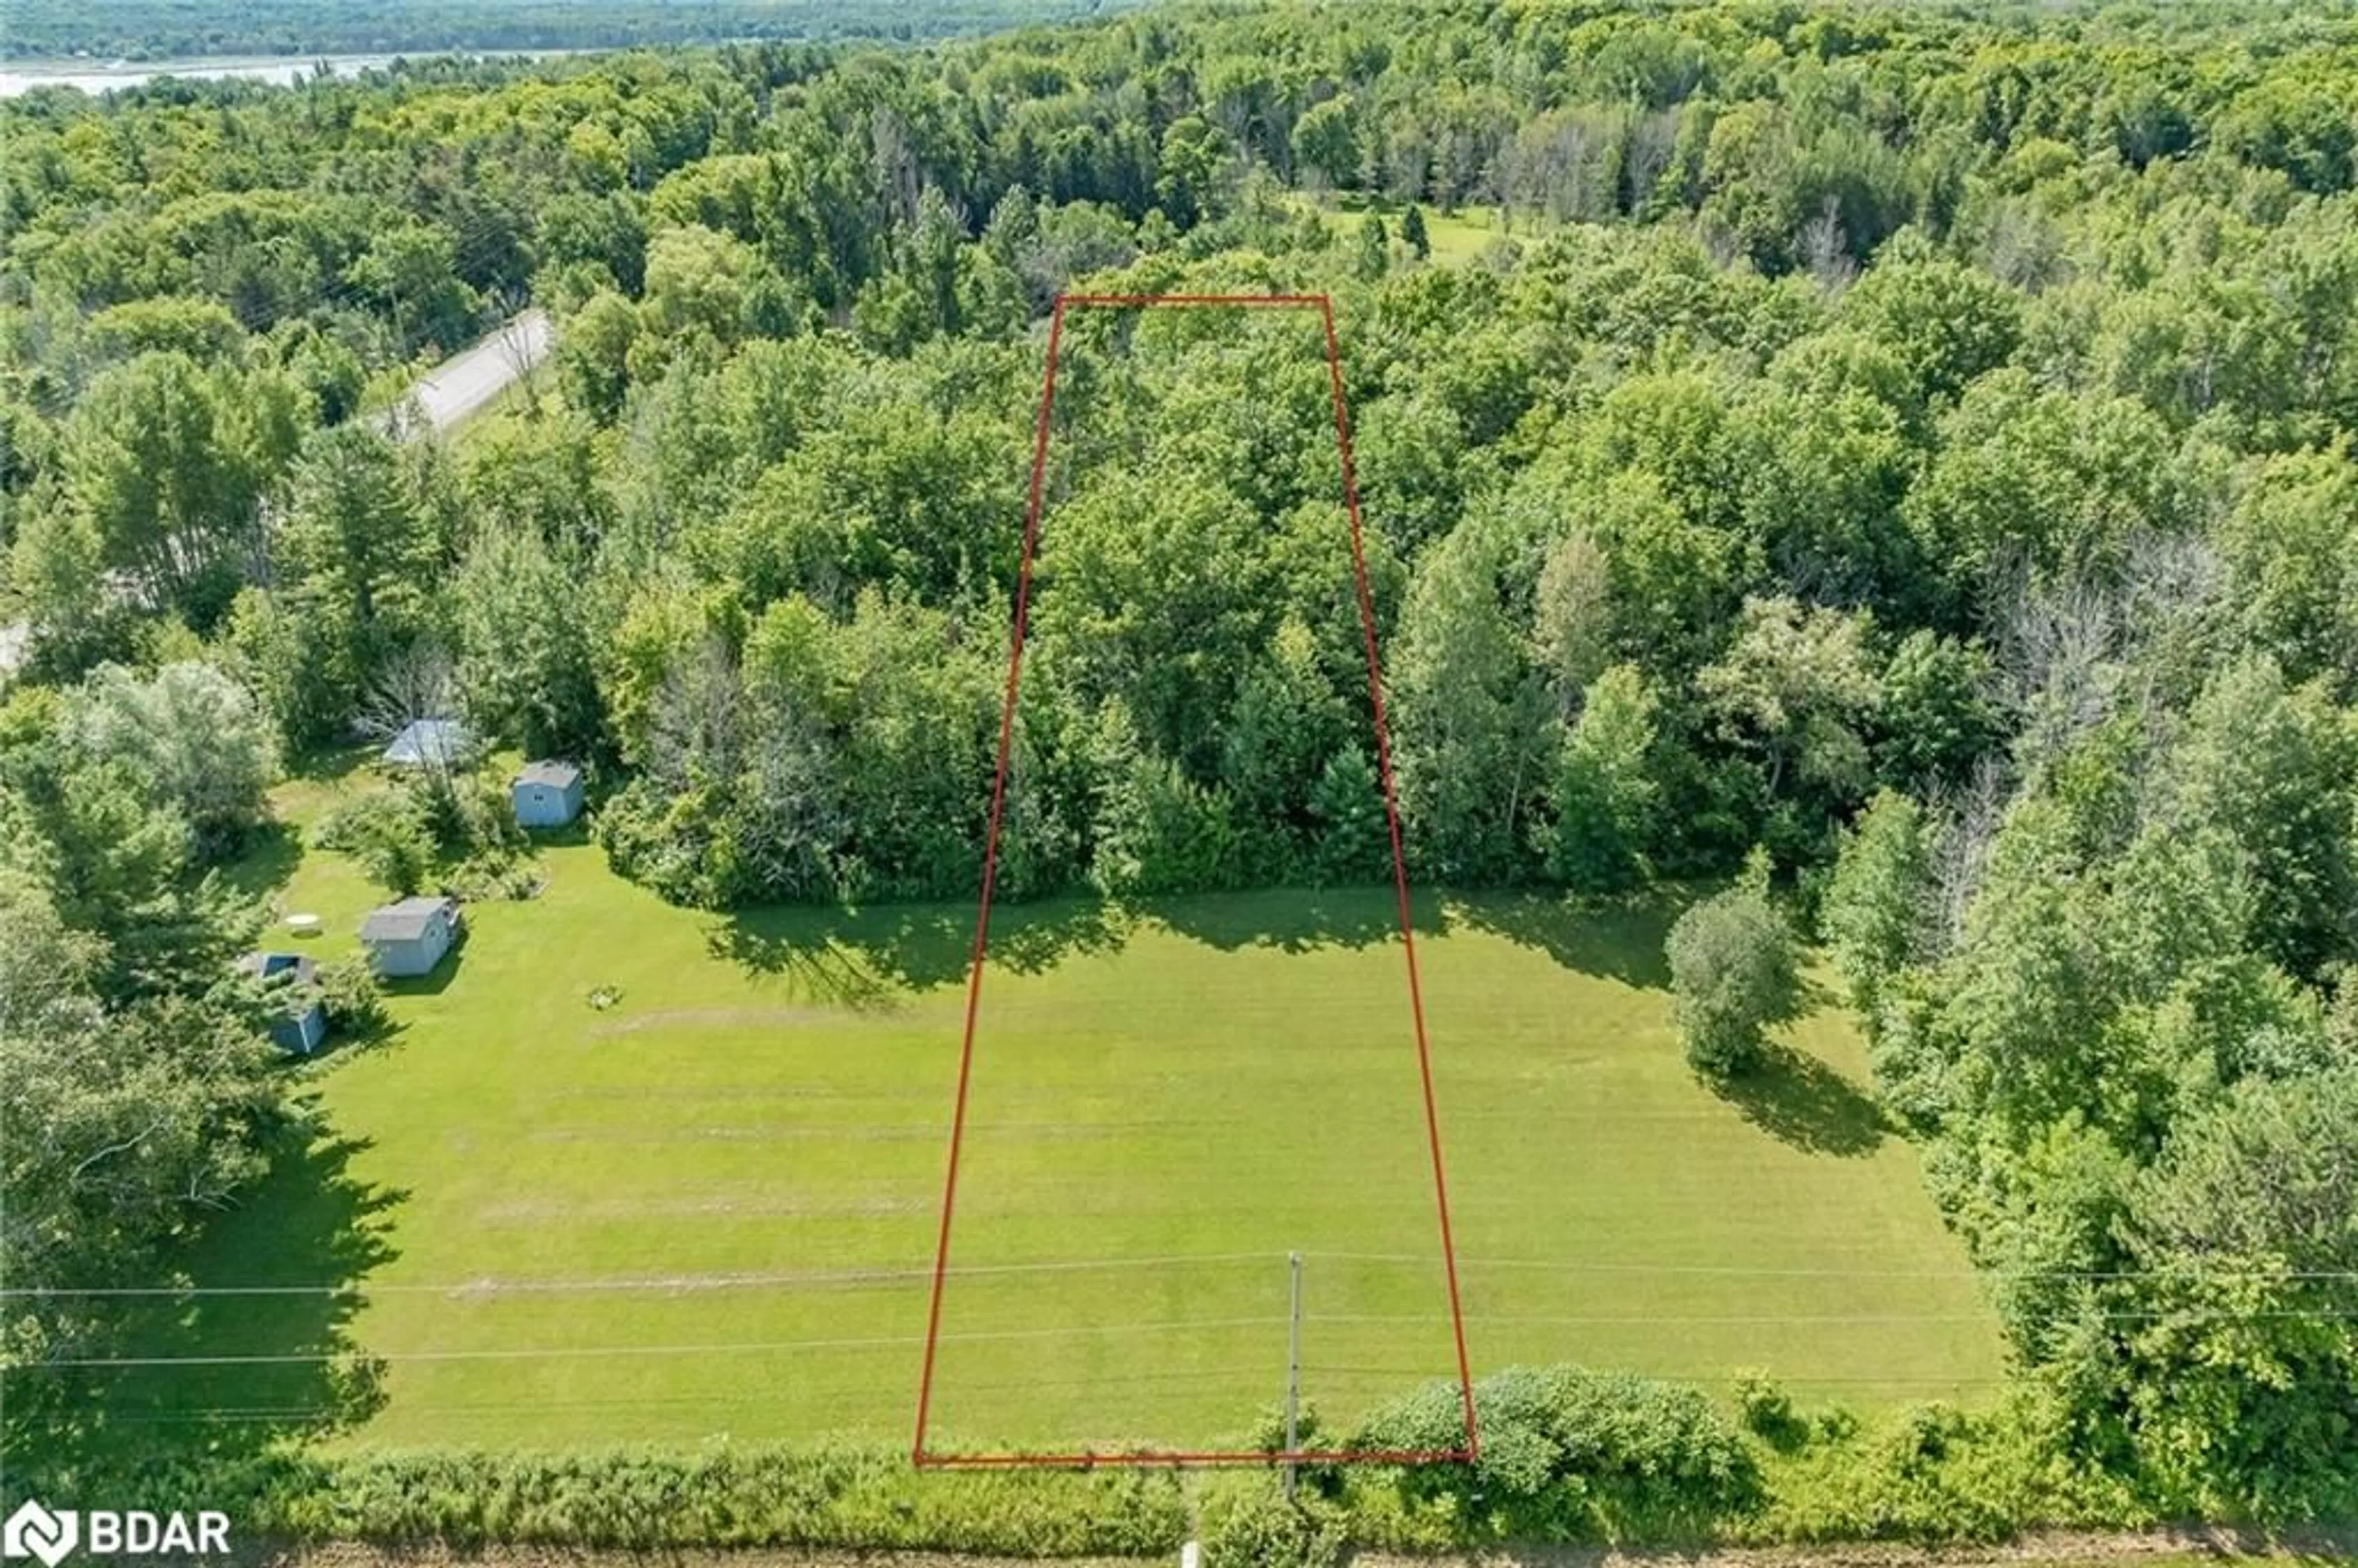 Fenced yard for TAY CON 7 PT LO N/A, Victoria Harbour Ontario L0K 2A0